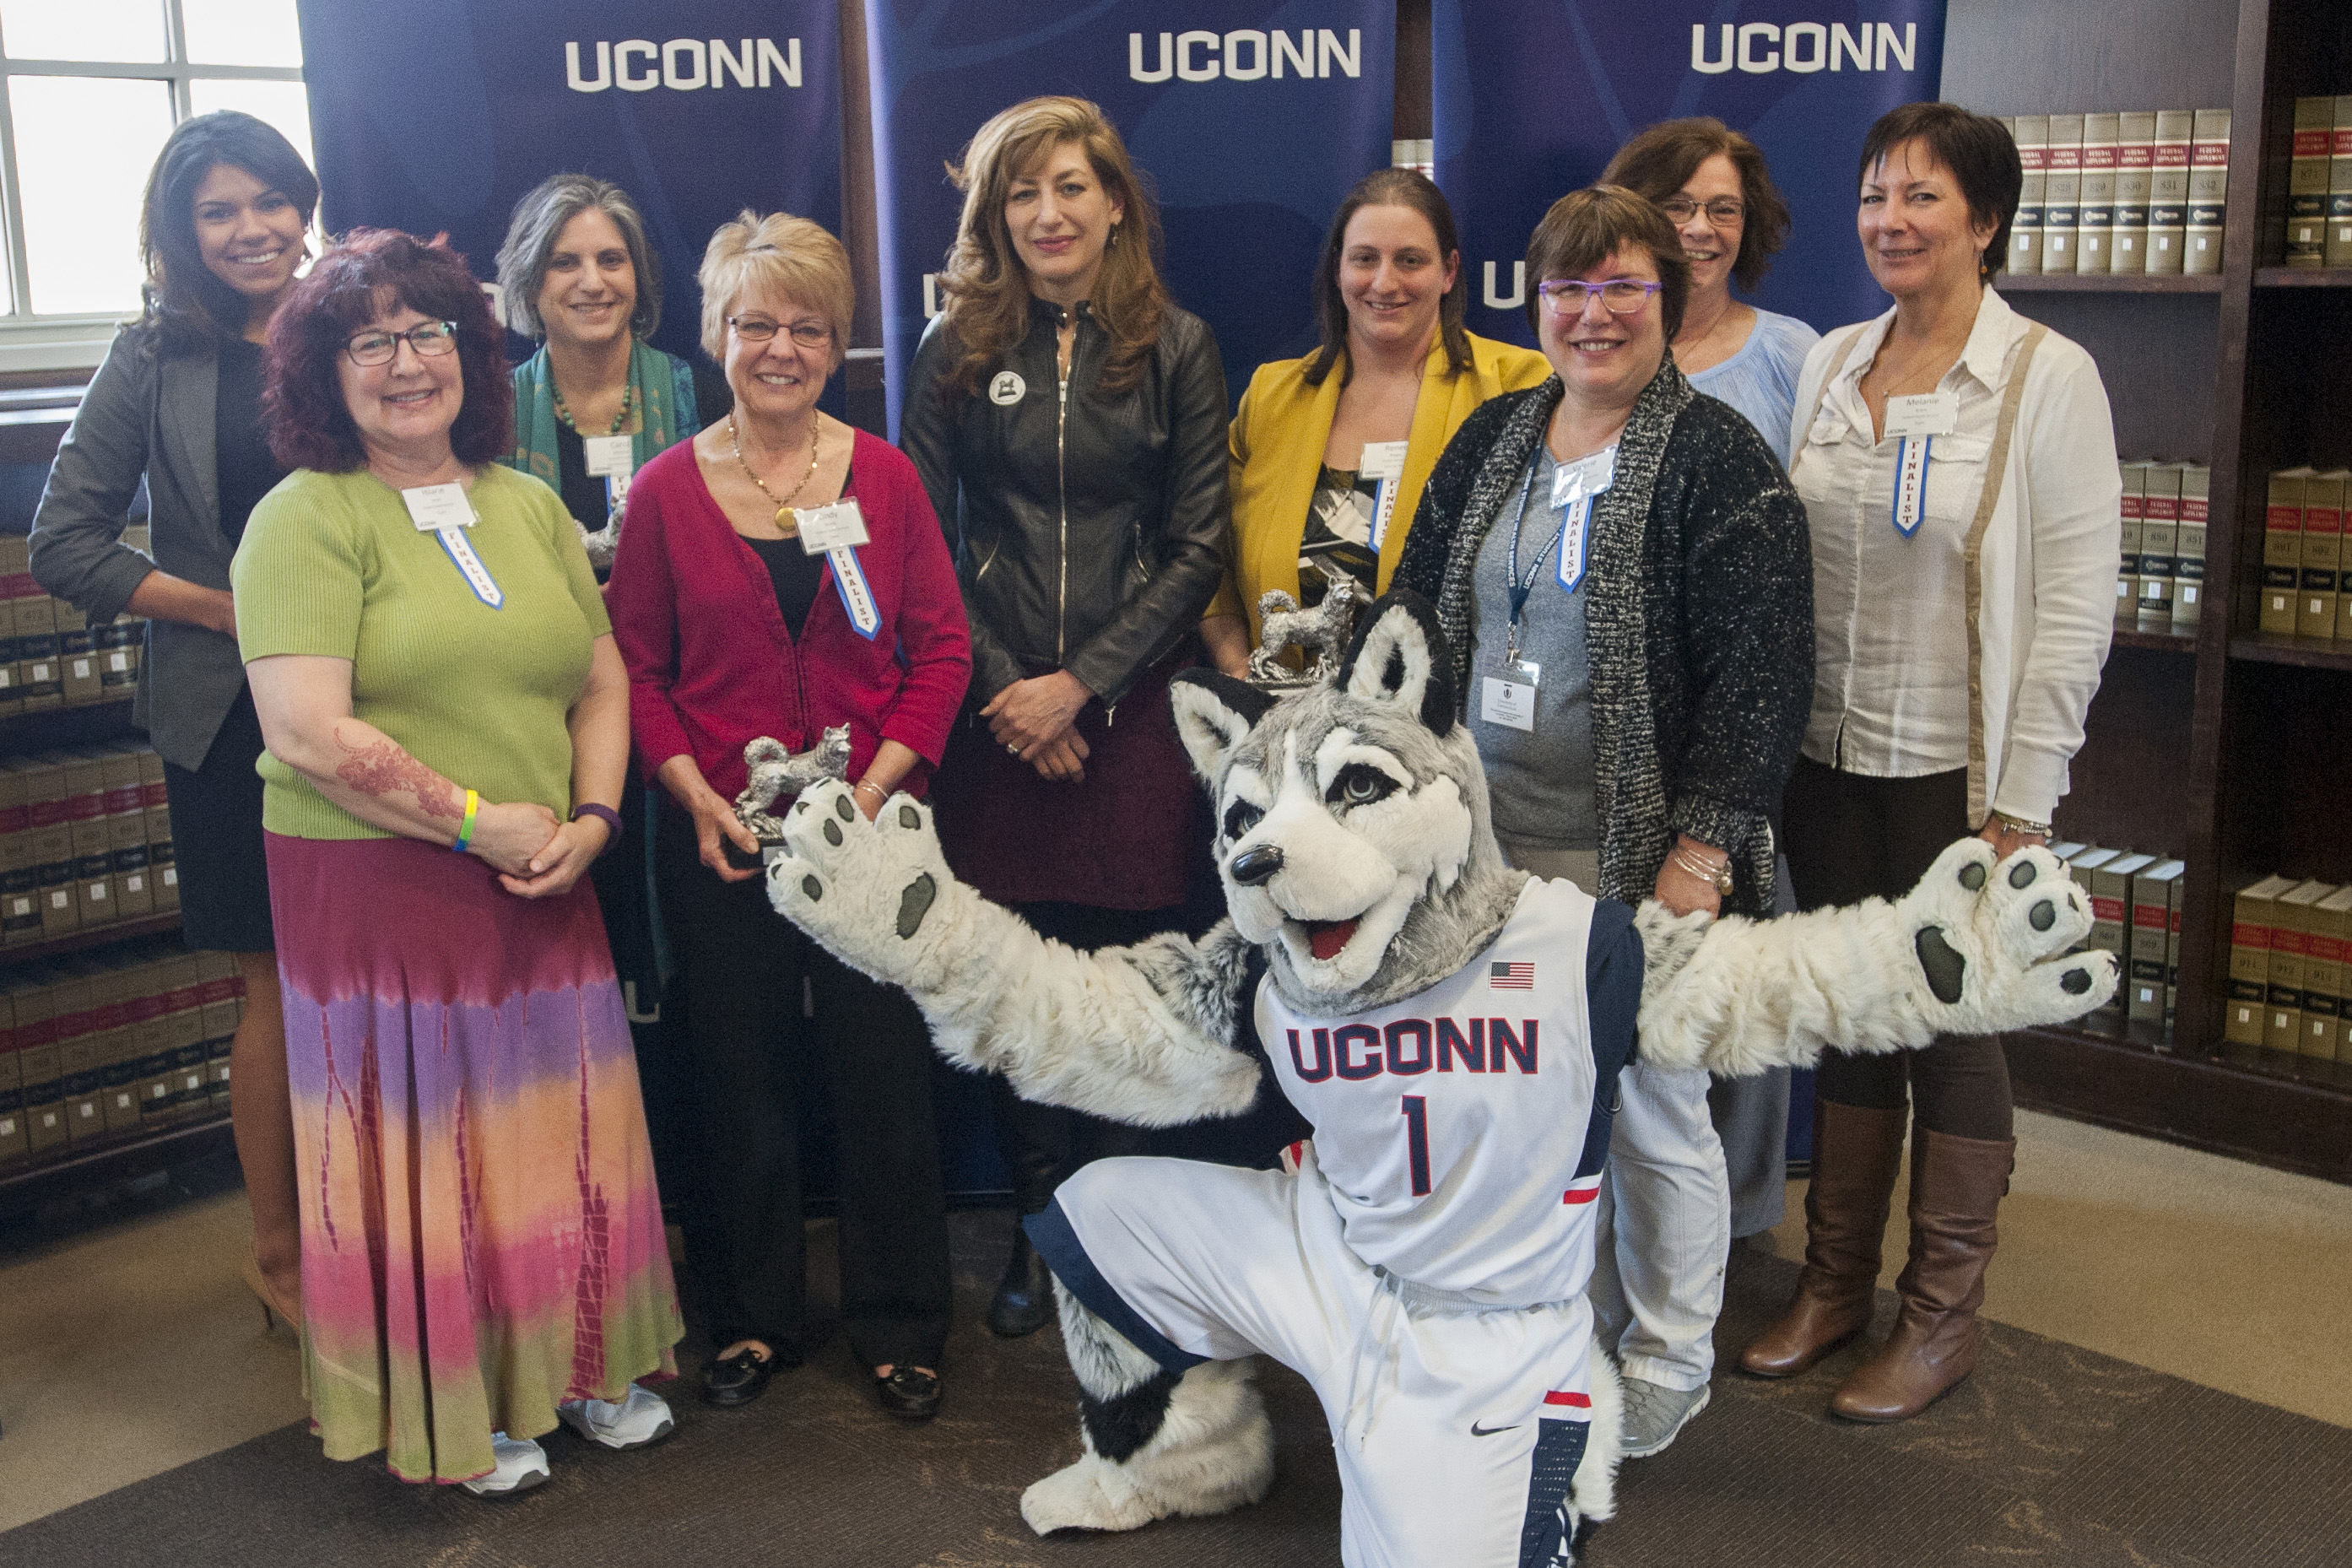 Back row from left, Aneesa Bey, Carol Millette, President Susan Herbst, Renee Boggis, Pat Moriarty, Melanie Kraus, front row, Hilarie Jones, Cindy Walsh, and Valerie Kiefer weree honored at the UConn Spirit Awards on March 8, 2016. (Sean Flynn/UConn Photo)